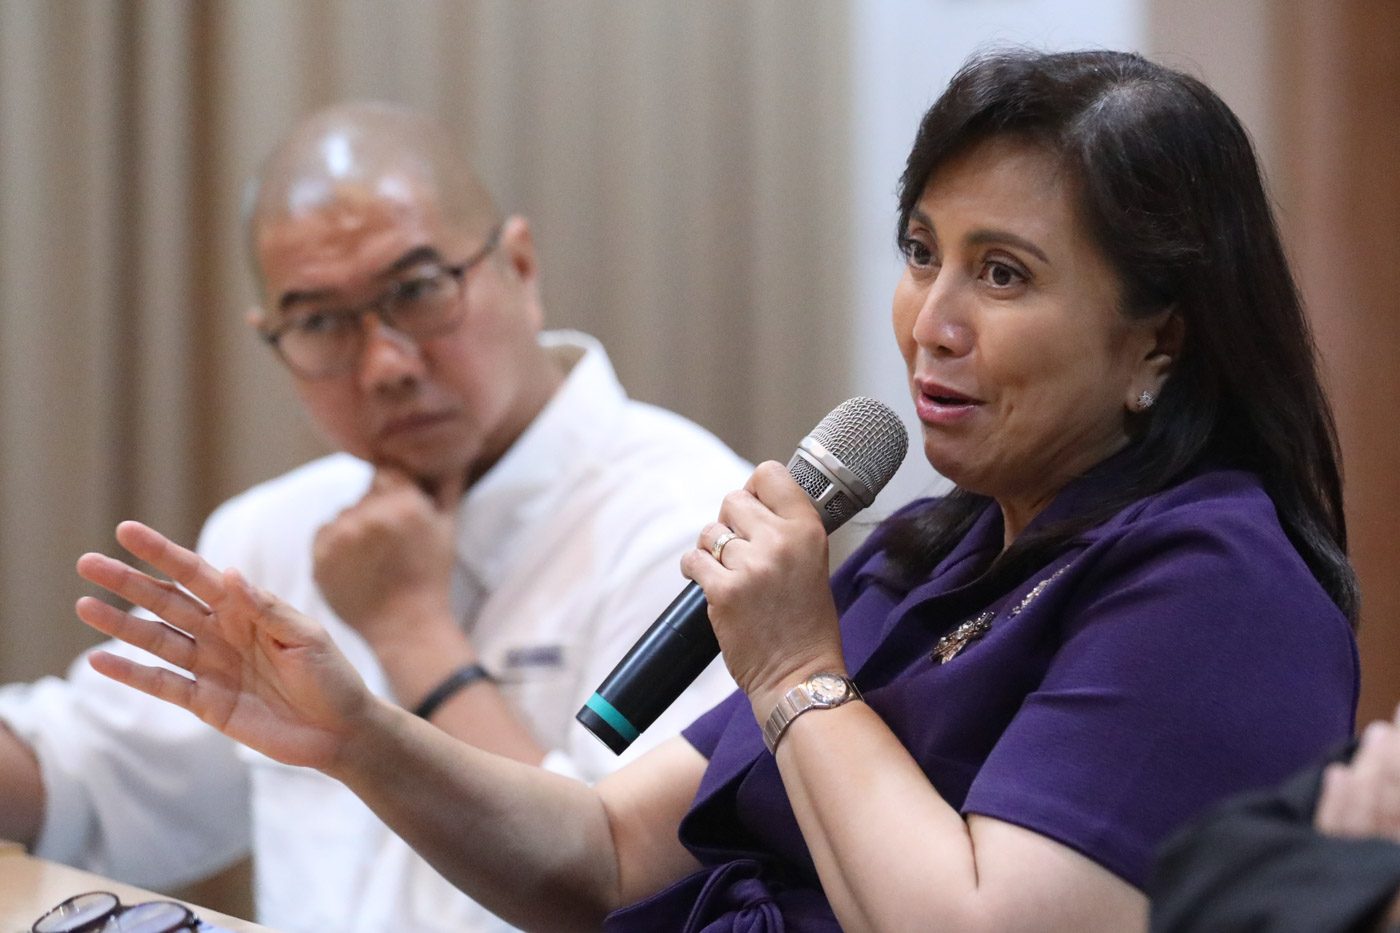 Trust not needed for Robredo to work as ICAD co-chair – Panelo